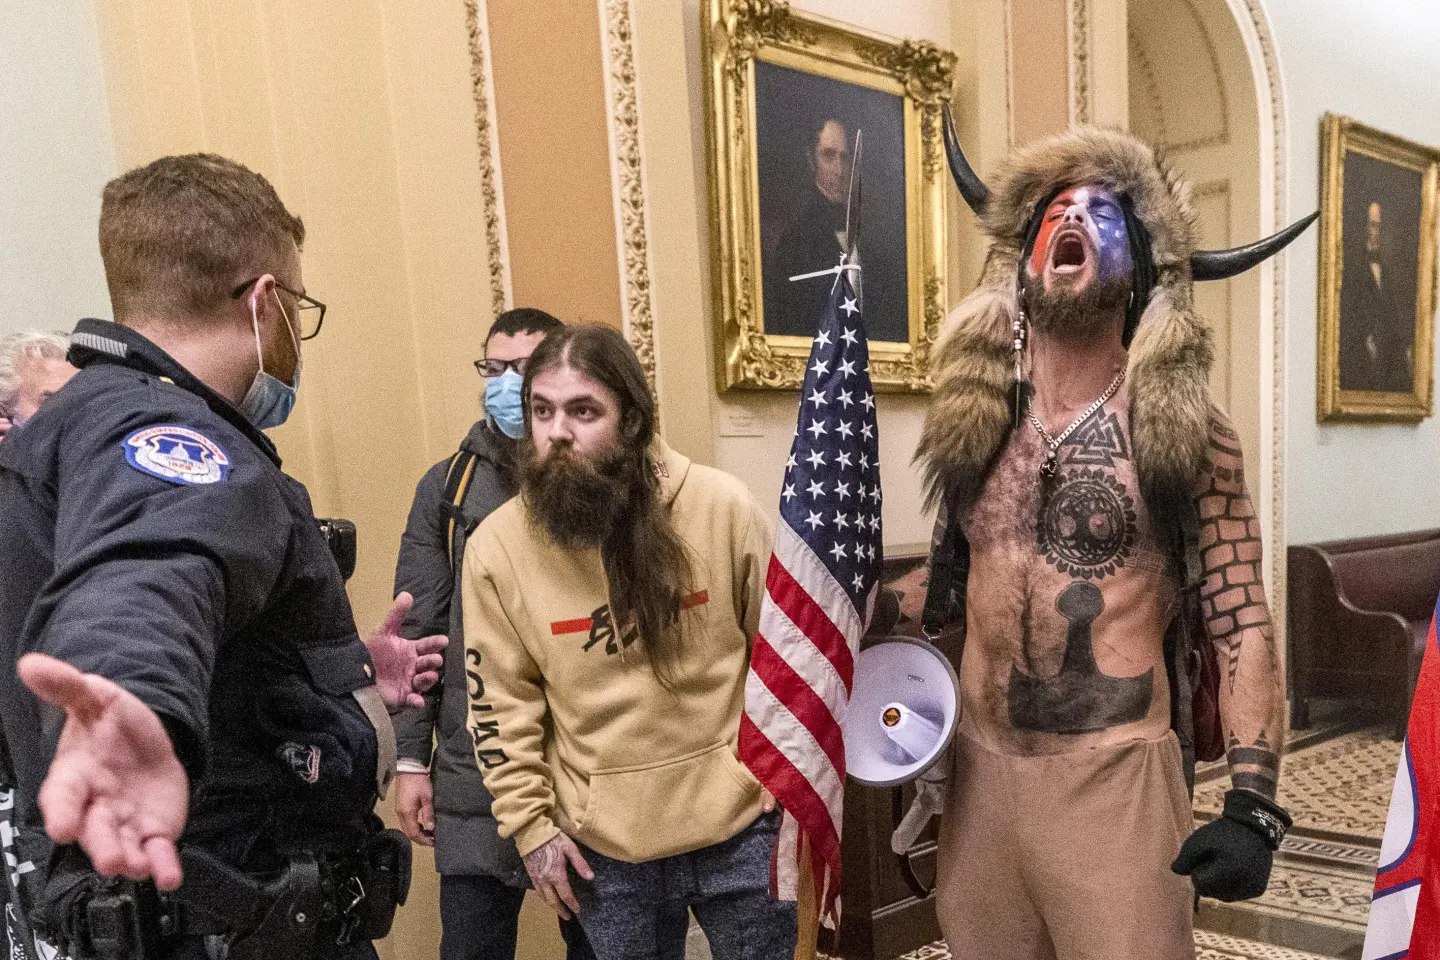 A mob stormed the US Capitol in historic insurrection